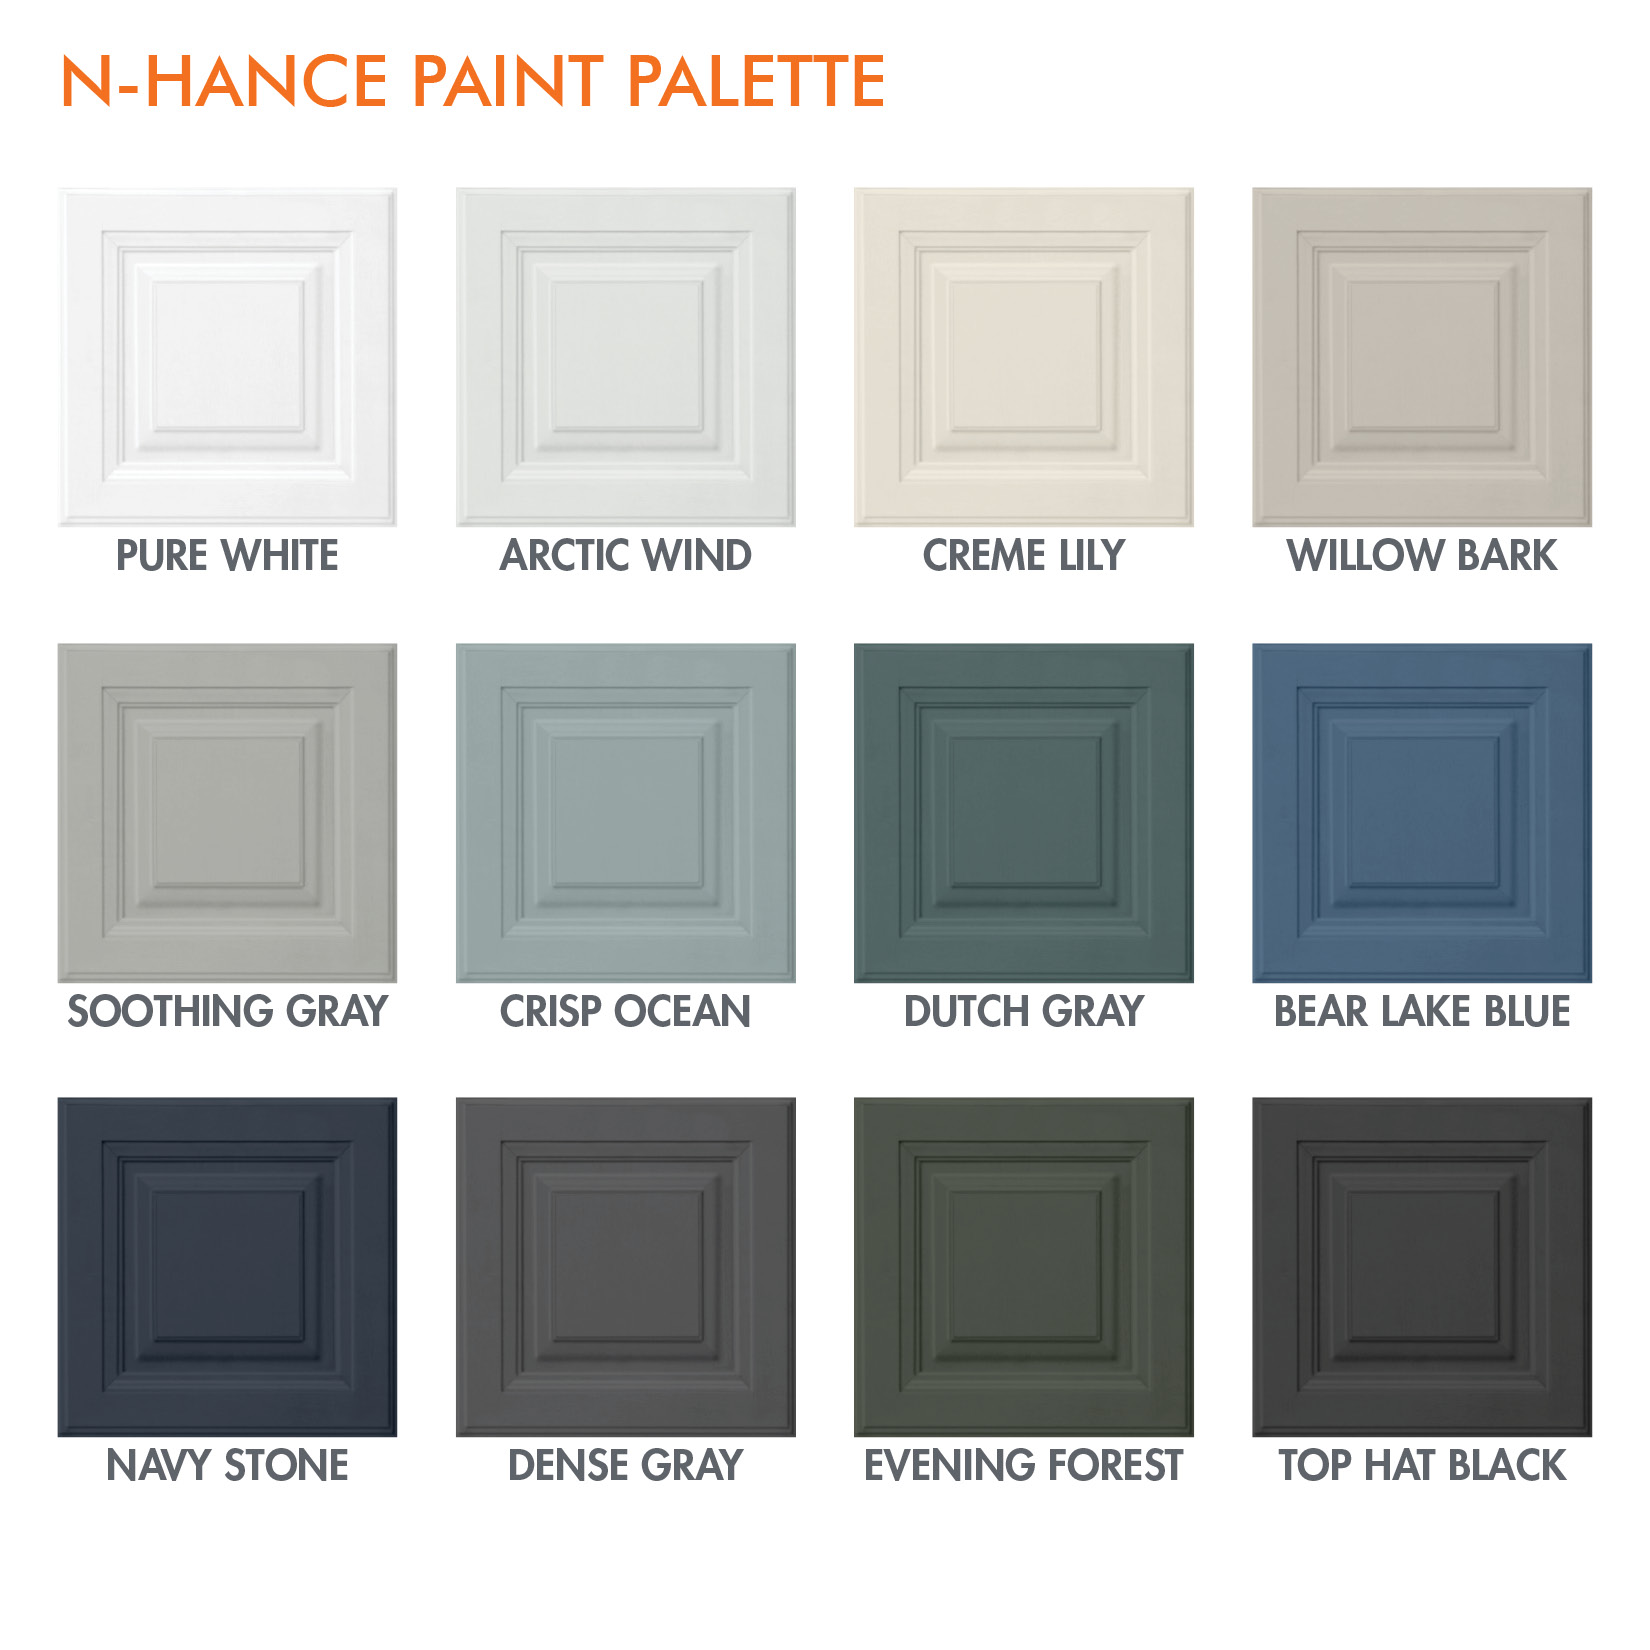 Cabinet Color Change Stain Pallet